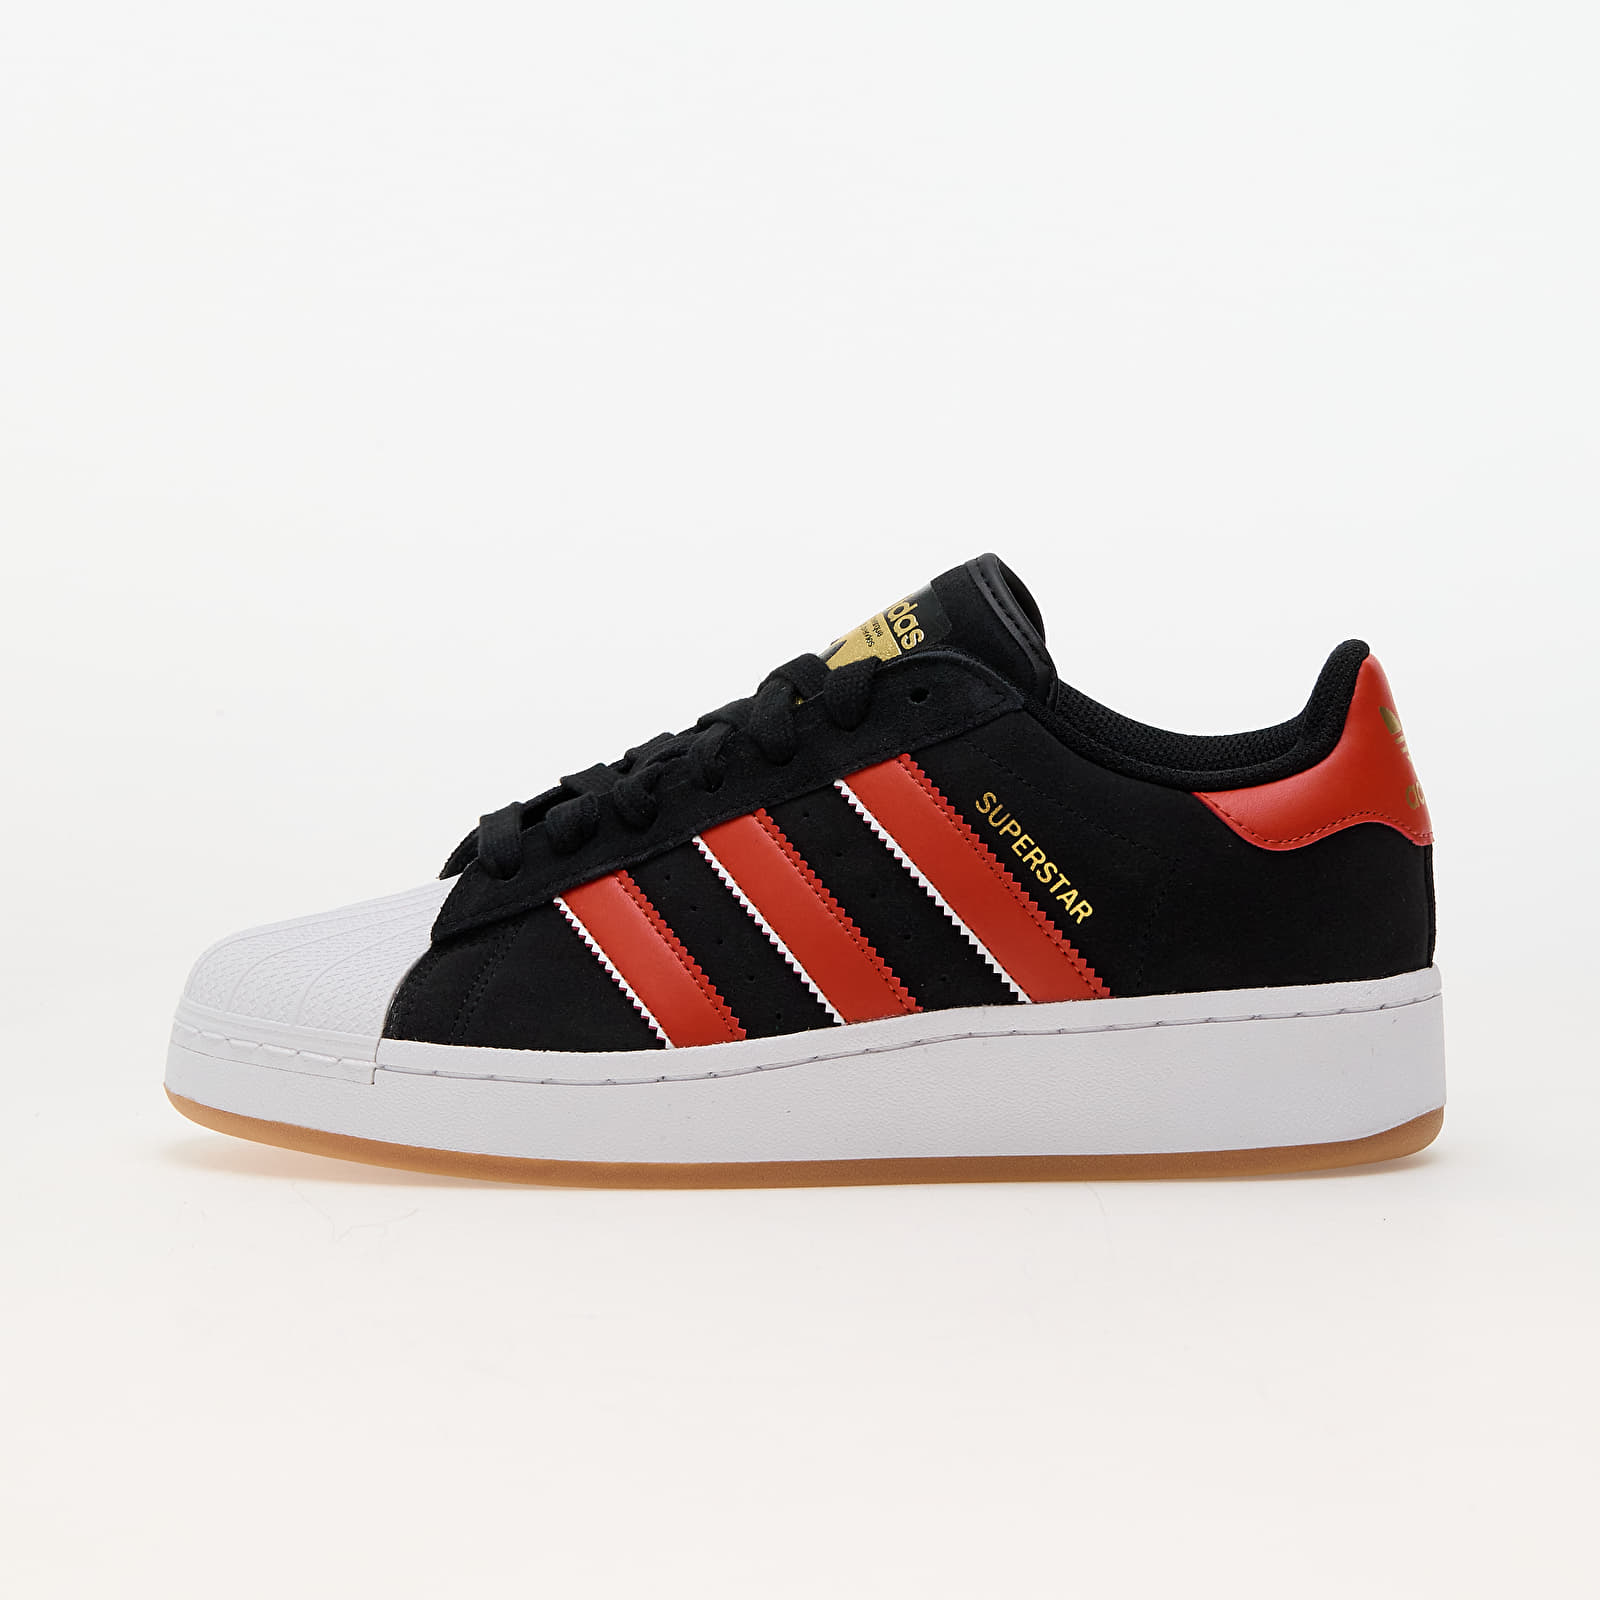 Chaussures et baskets homme adidas Superstar Xlg Core Black/ Preloveded Red/ Gold Metallic